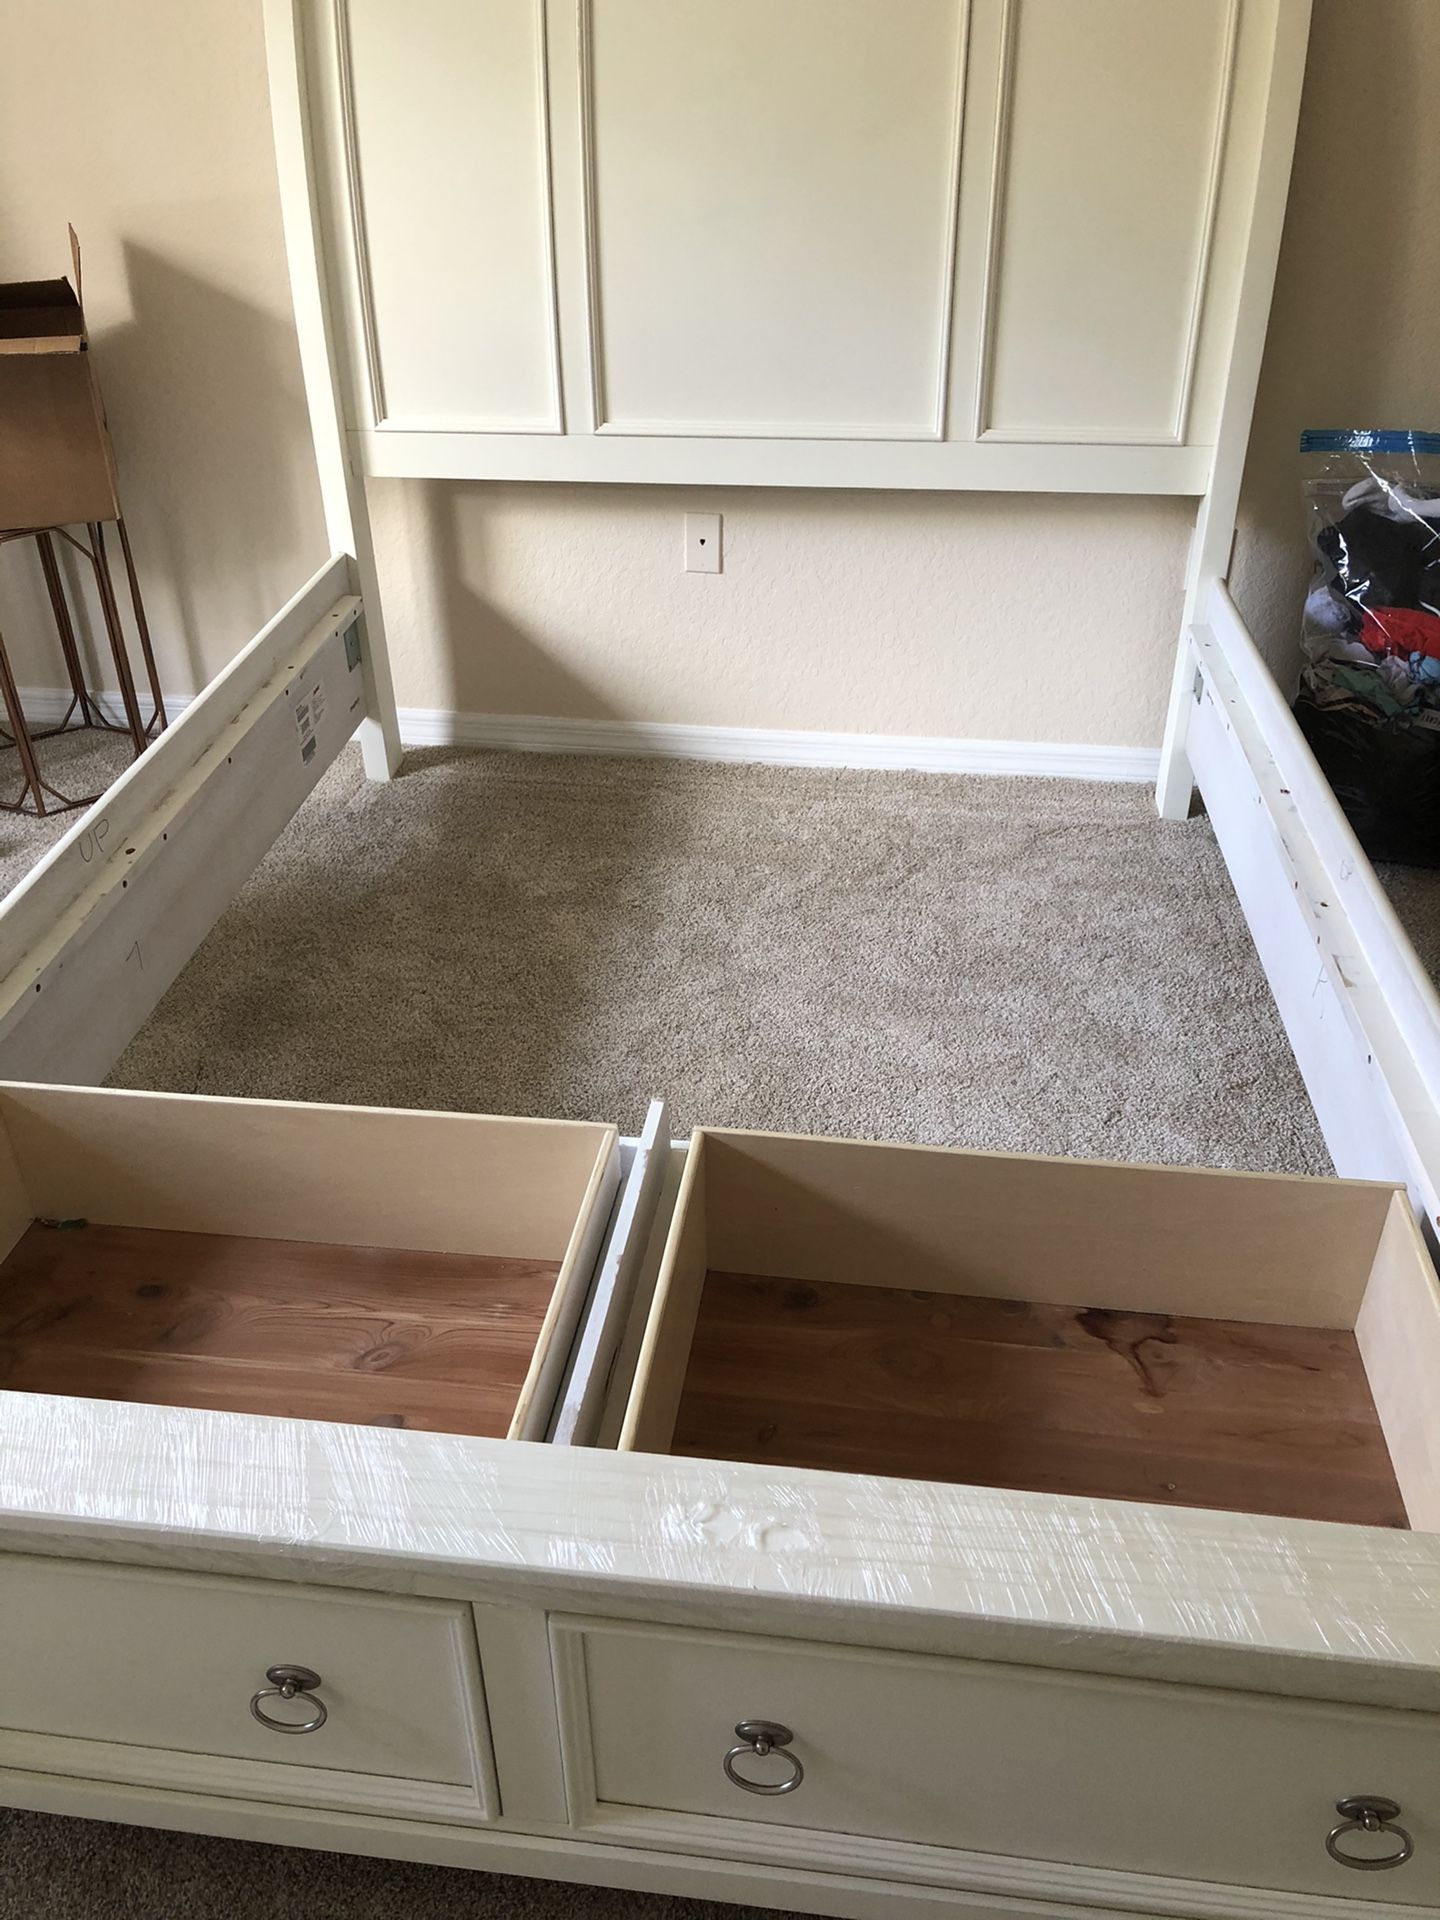 Queen Sleigh Bed Frame with Drawers MUST GO